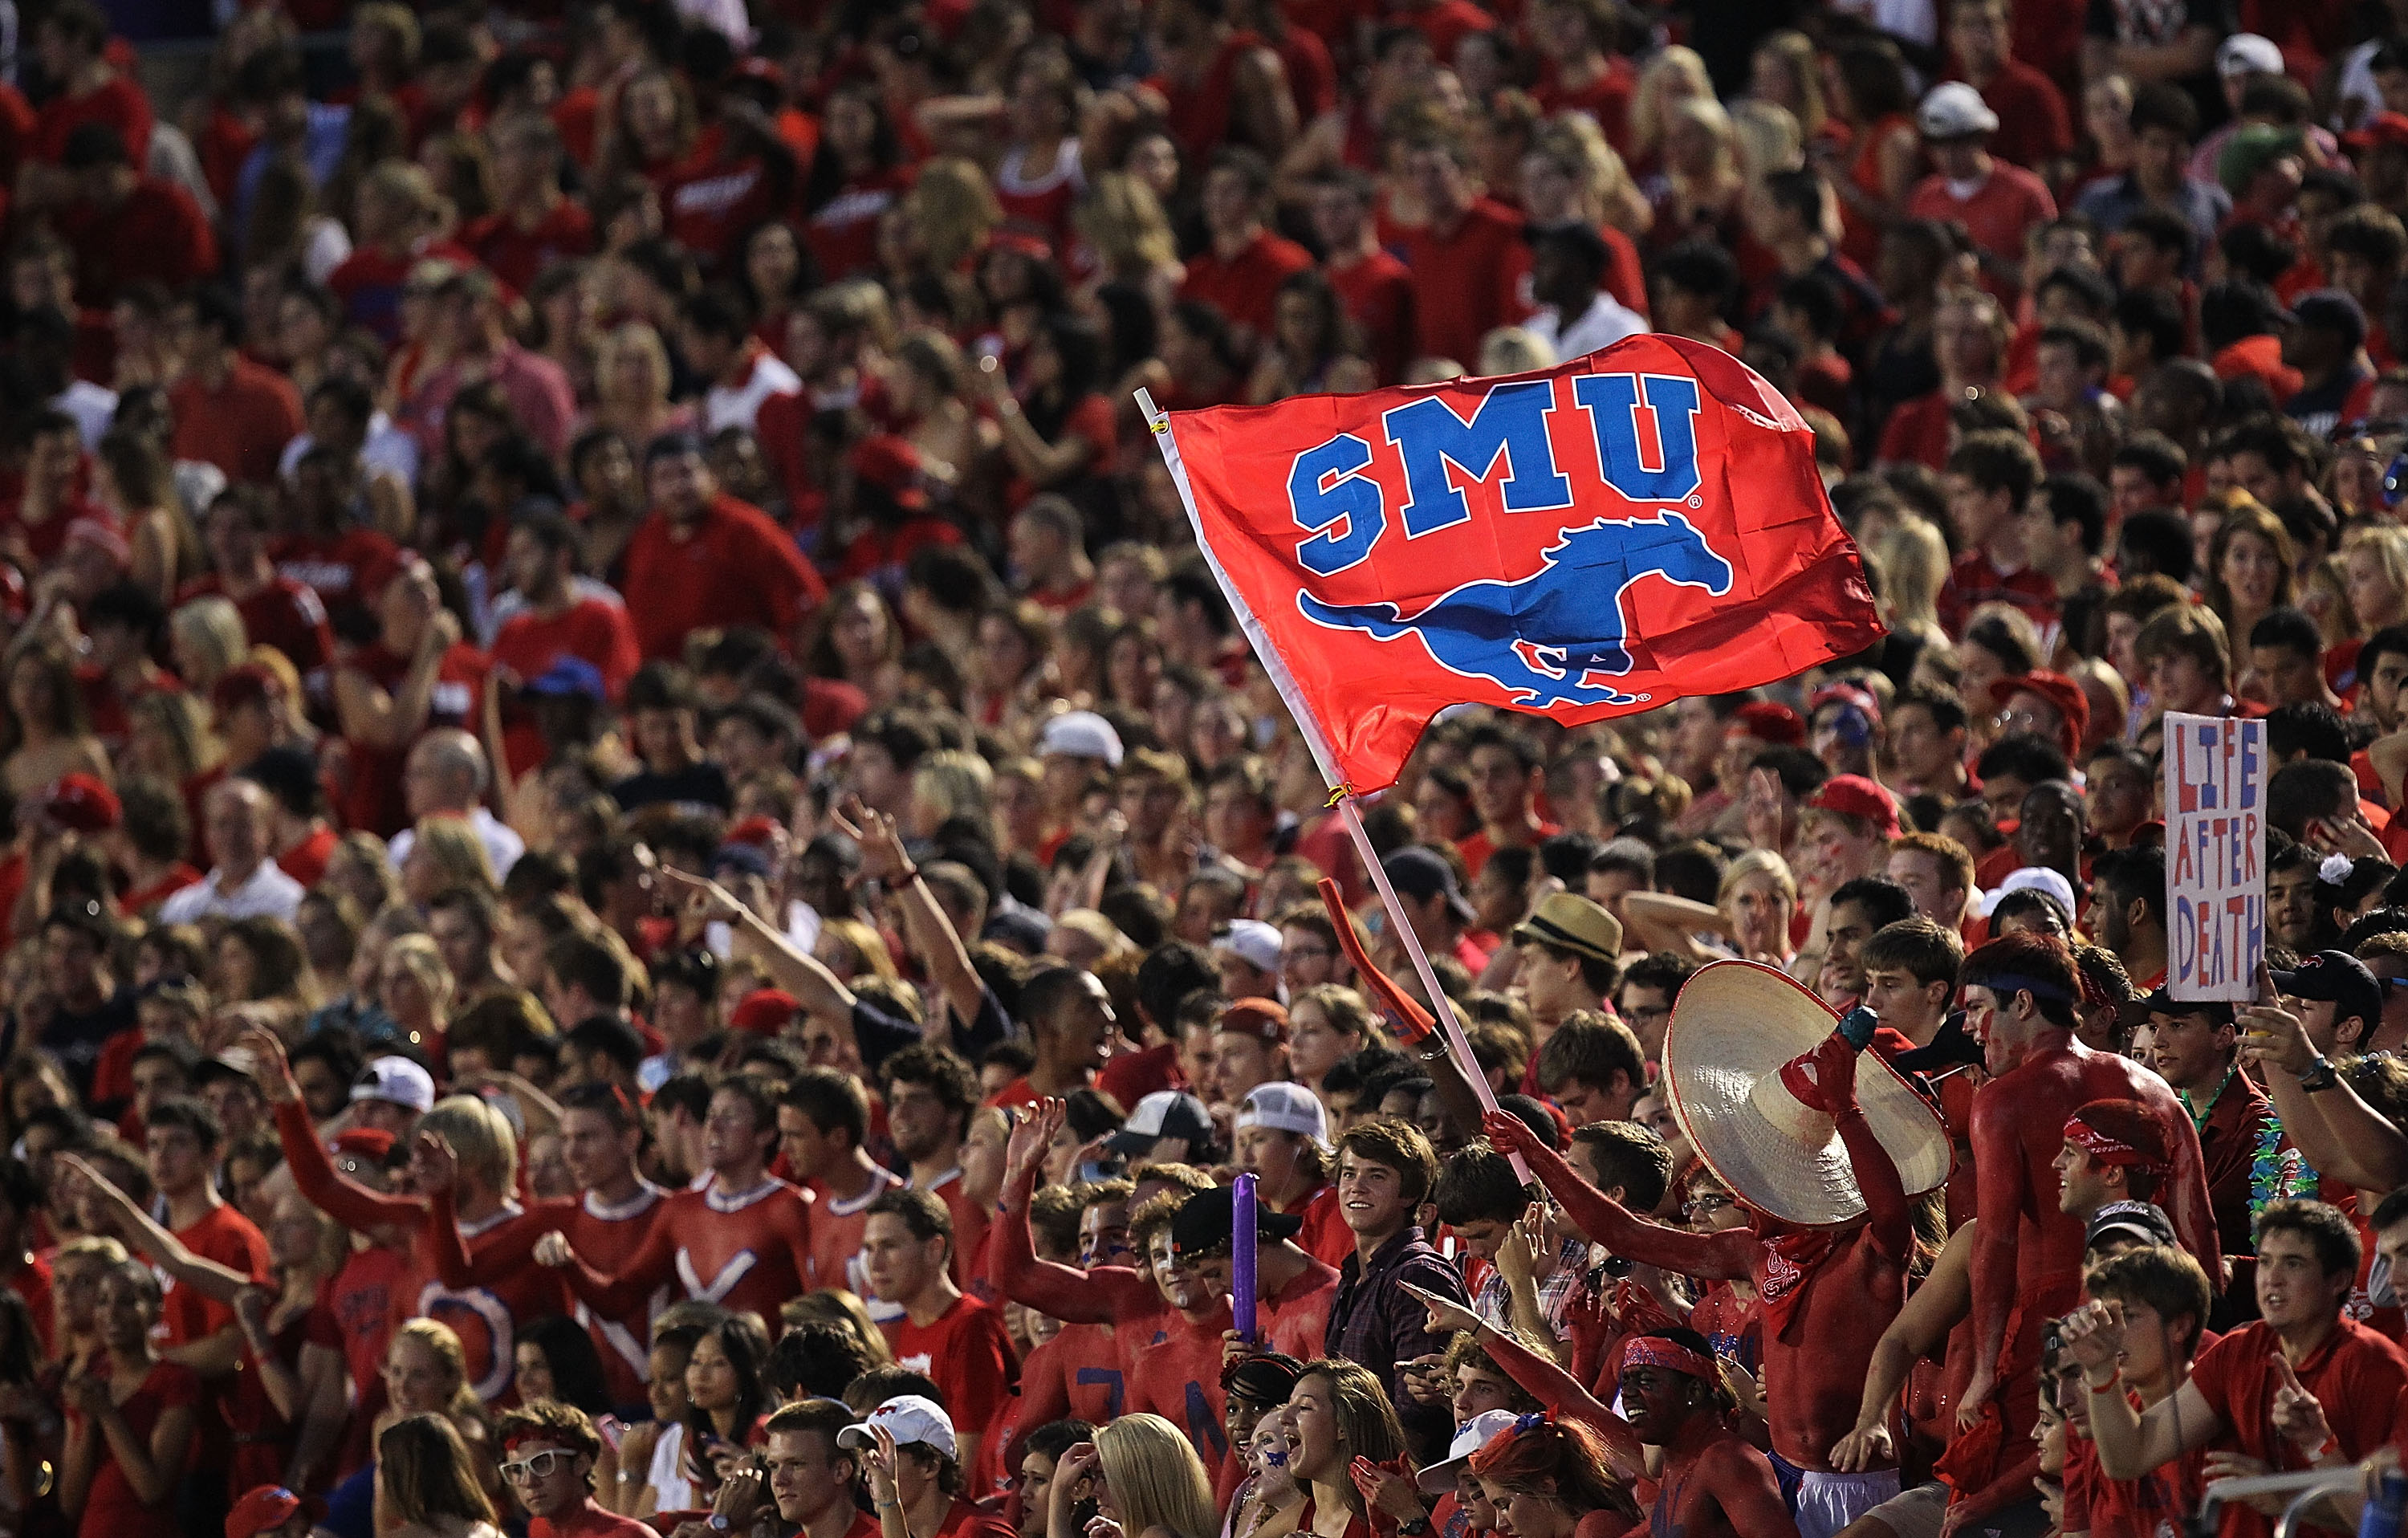 DALLAS - SEPTEMBER 24:  Fans of the SMU Mustangs wave a flag during play against the TCU Horned Frogs at Gerald J. Ford Stadium on September 24, 2010 in Dallas, Texas.  (Photo by Ronald Martinez/Getty Images)